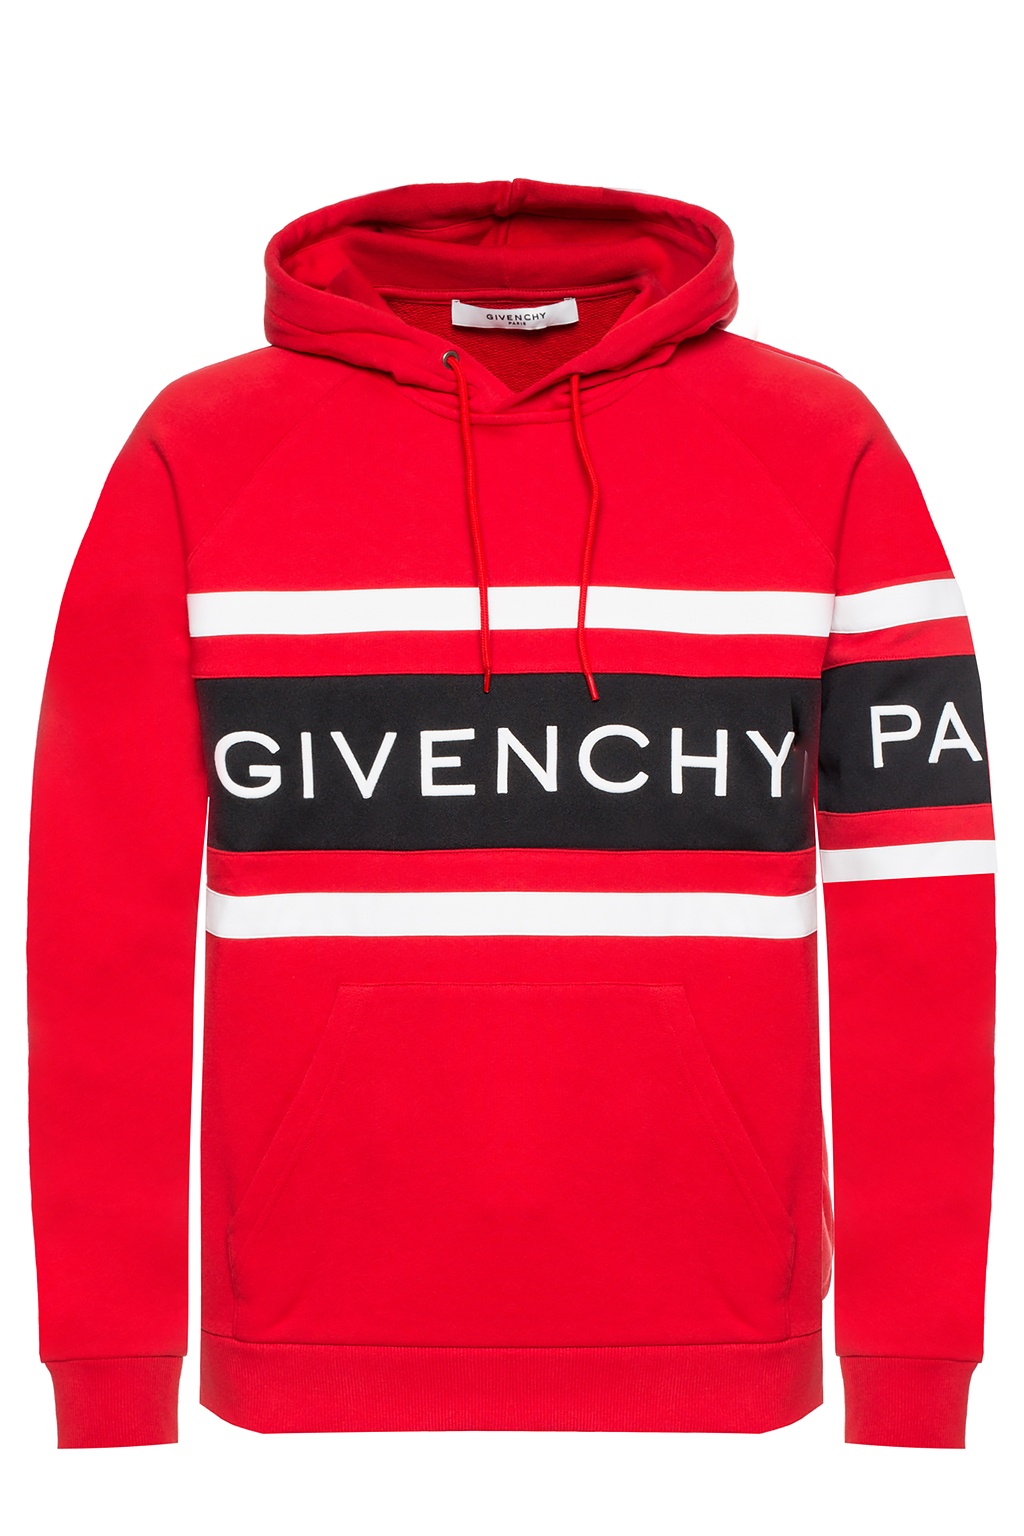 Givenchy Hoodie with tactile logo | Men's Clothing | Vitkac